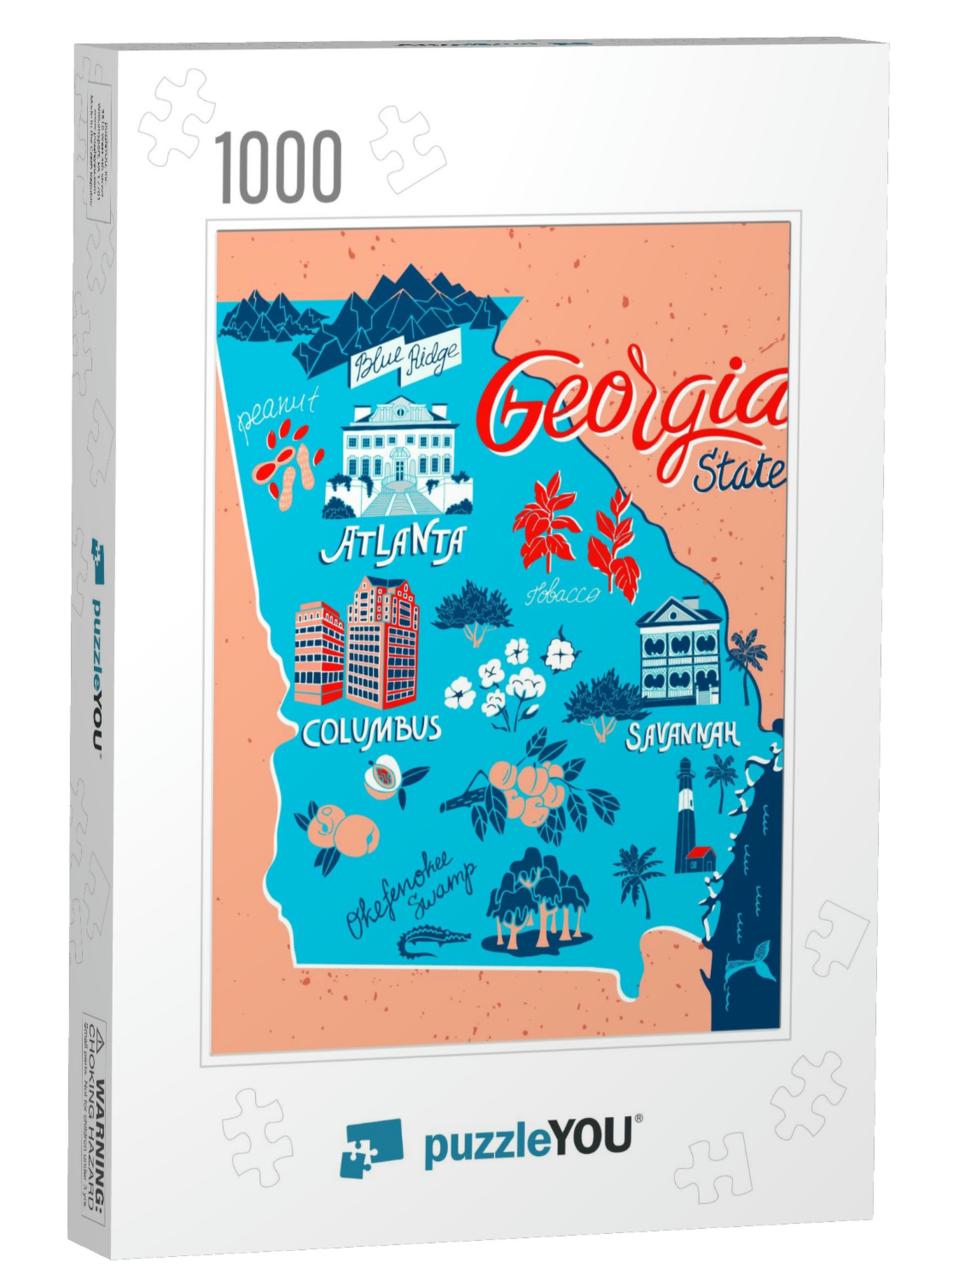 Illustrated Map of Georgia, Usa. Travel & Attractions... Jigsaw Puzzle with 1000 pieces